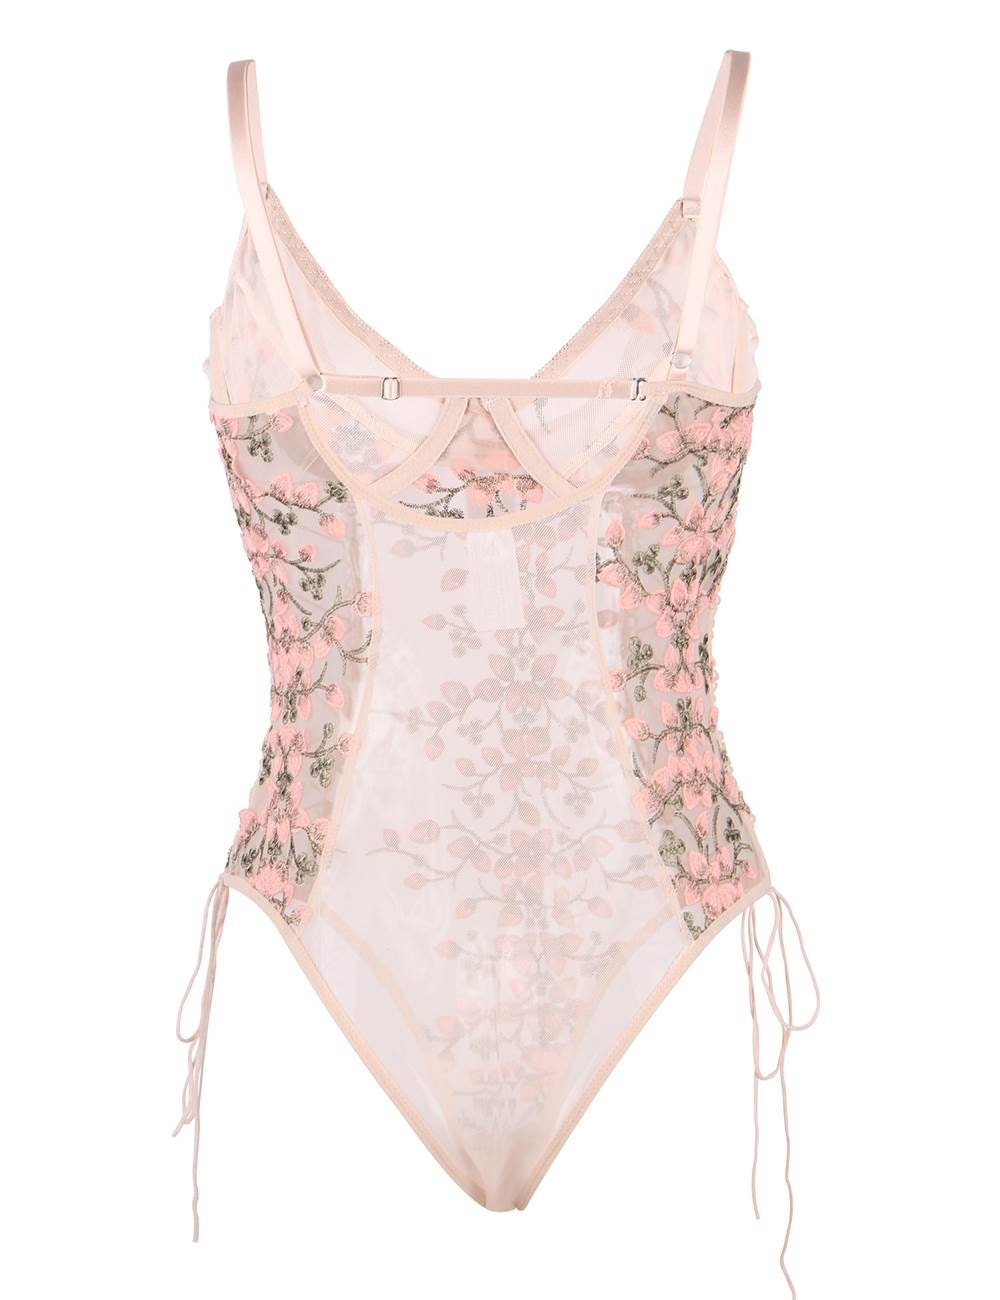 Pink Mesh Embroidery Bodysuit Teddy With Underwire Size XS-4XL - Etsy